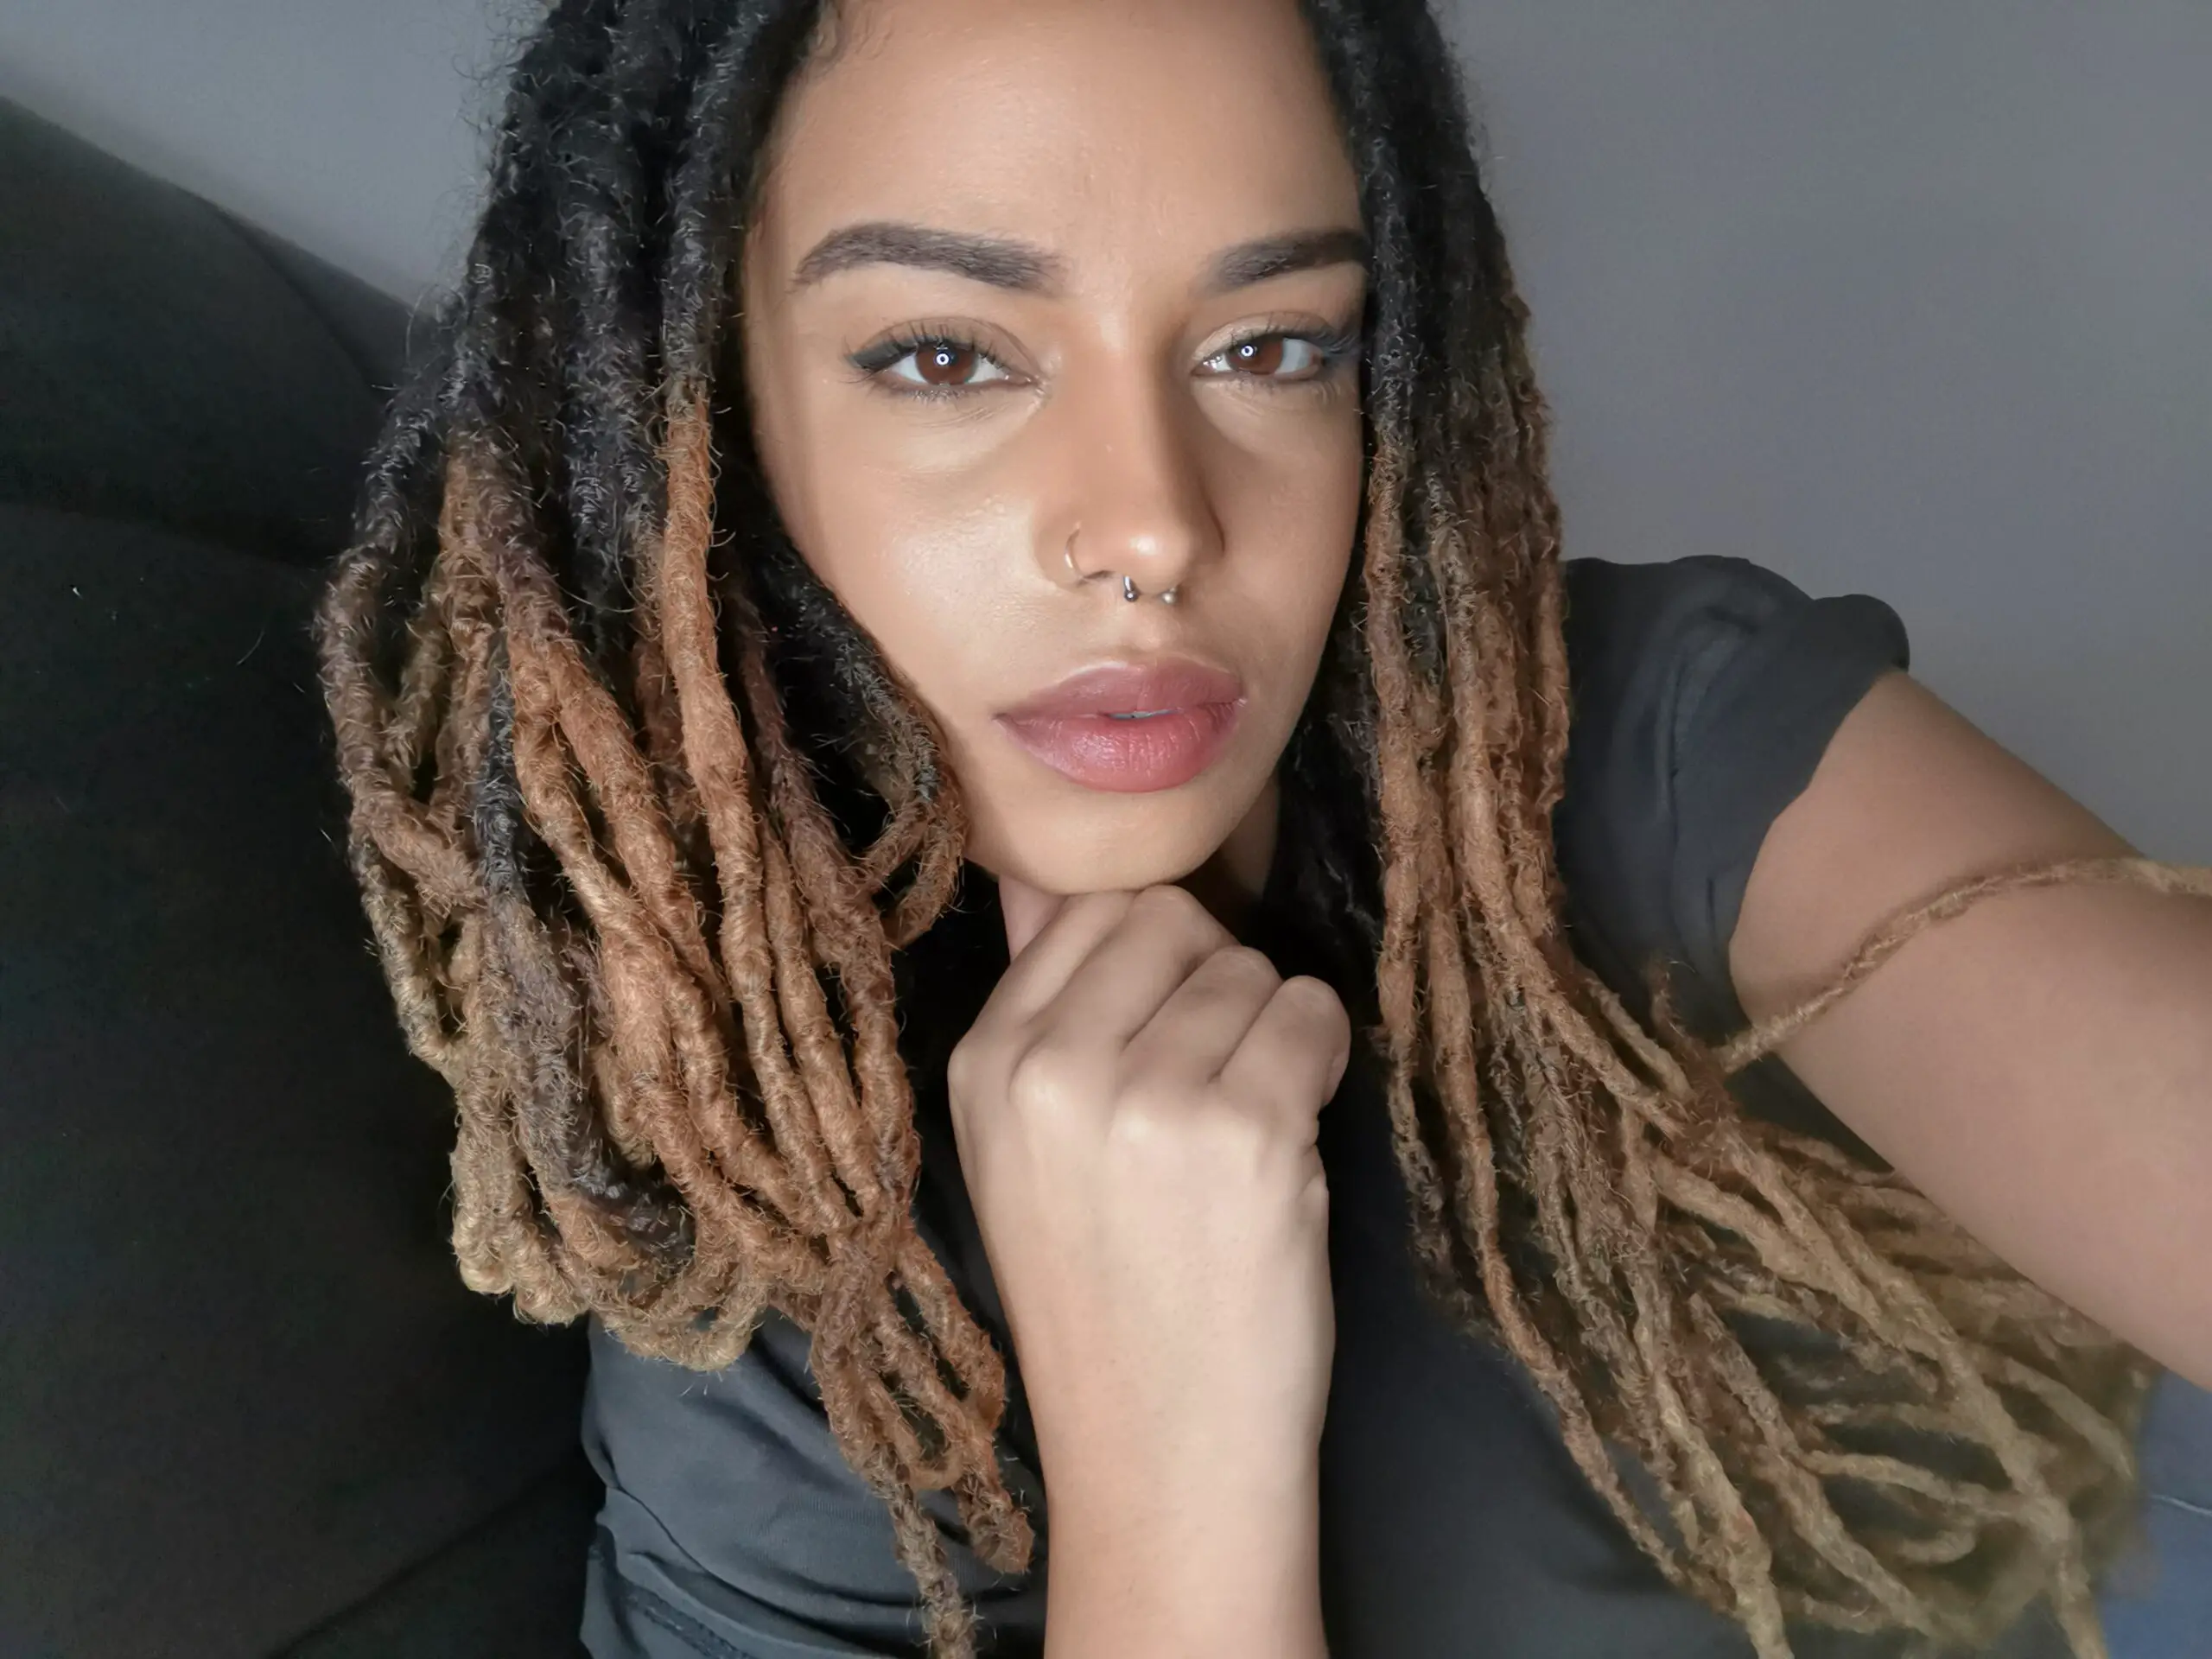 woman with Rasta and septum piercing